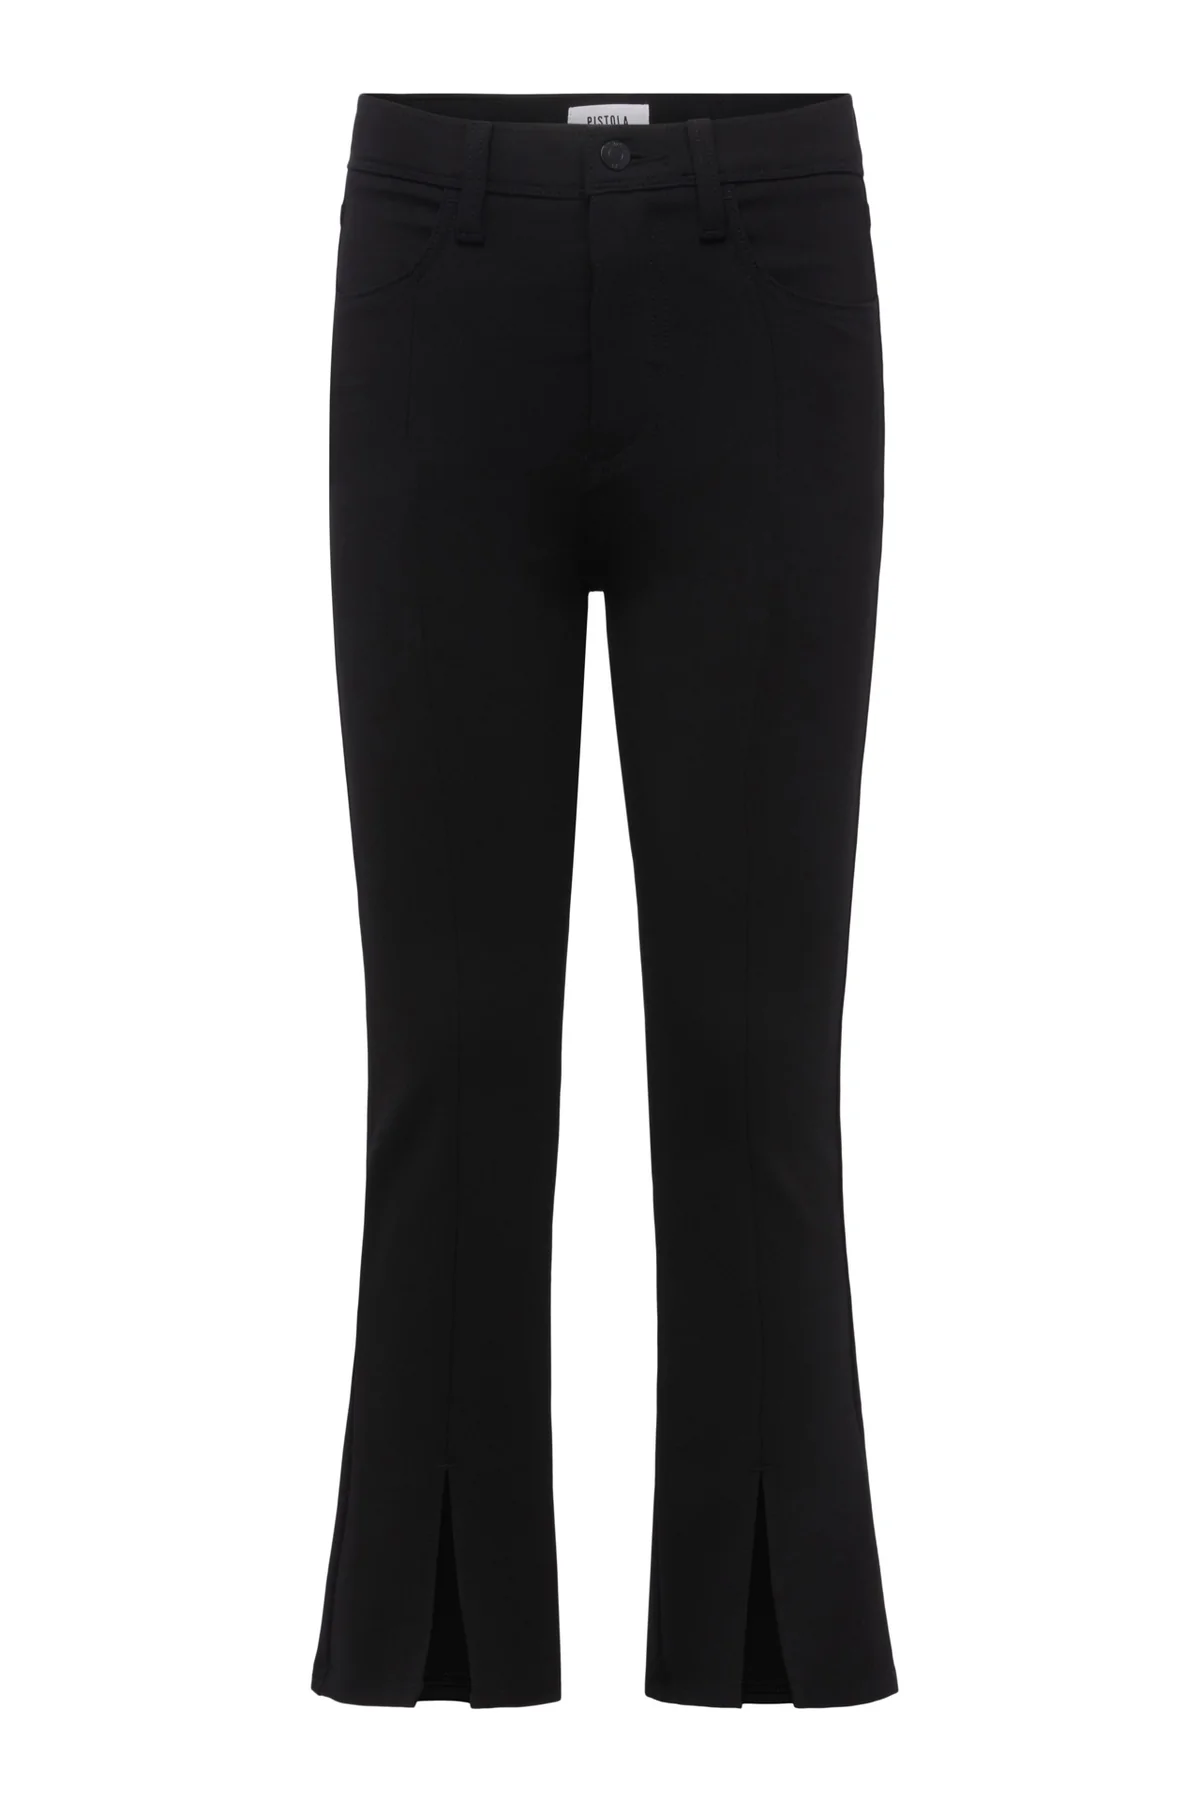 LENNON HIGH RISE CROP PANT - NIGHT OUT